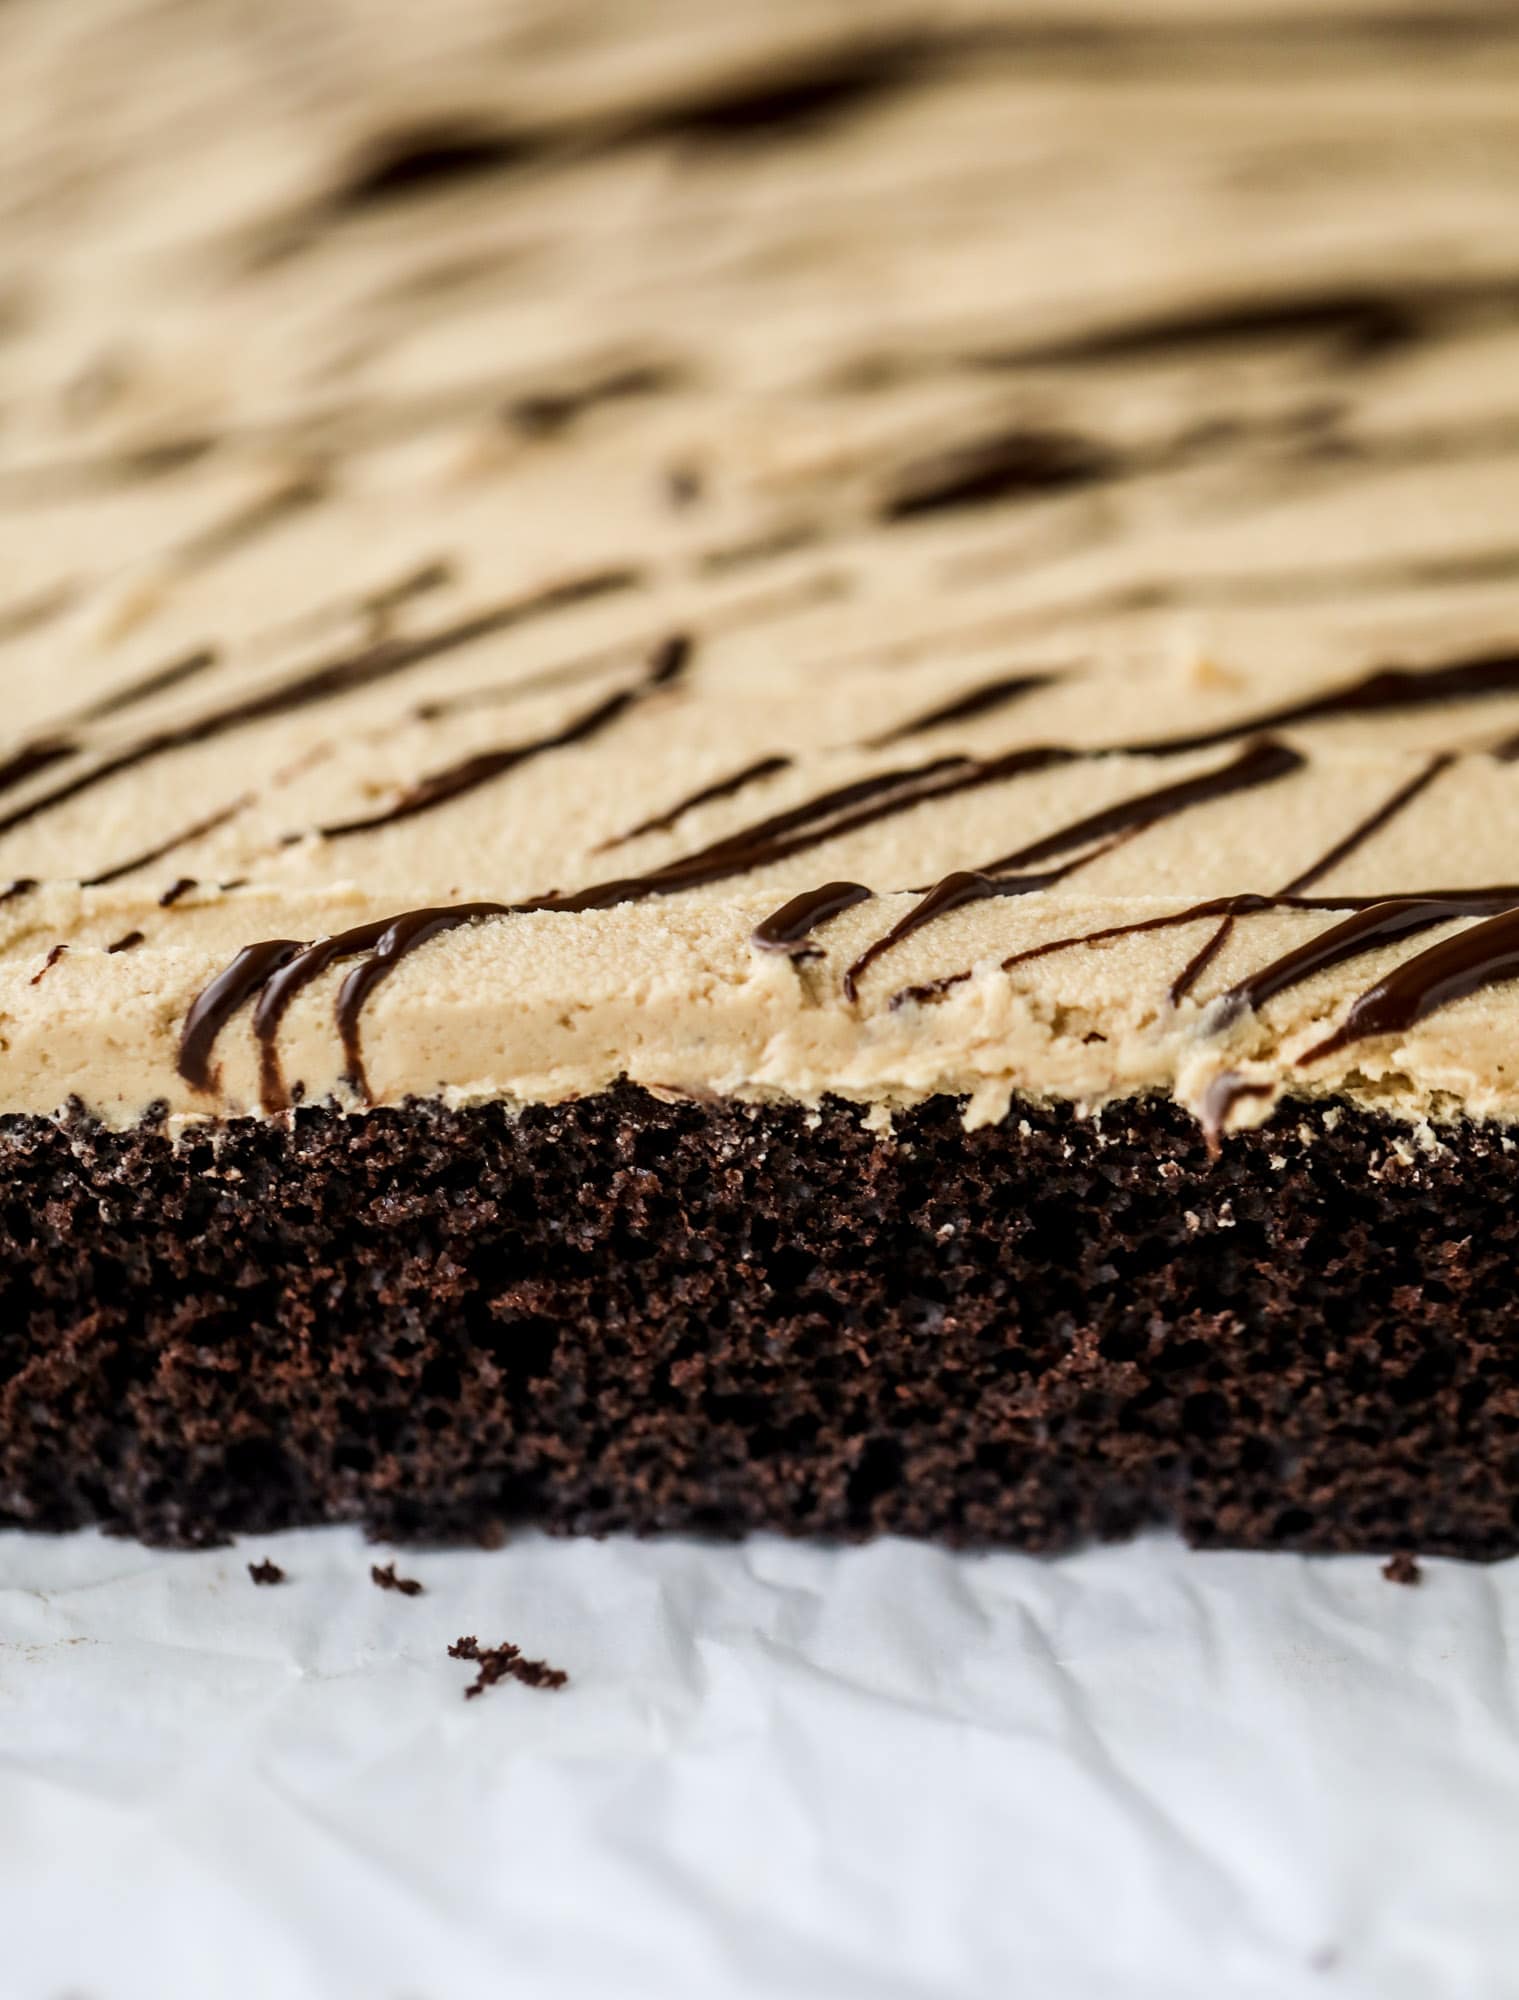 Easy chocolate peanut butter cake is the way to my heart. Moist chocolate cake, fluffy peanut butter frosting. It's the perfect dessert, anytime! I howsweeteats.com #chocolatepeanutbutter #cake